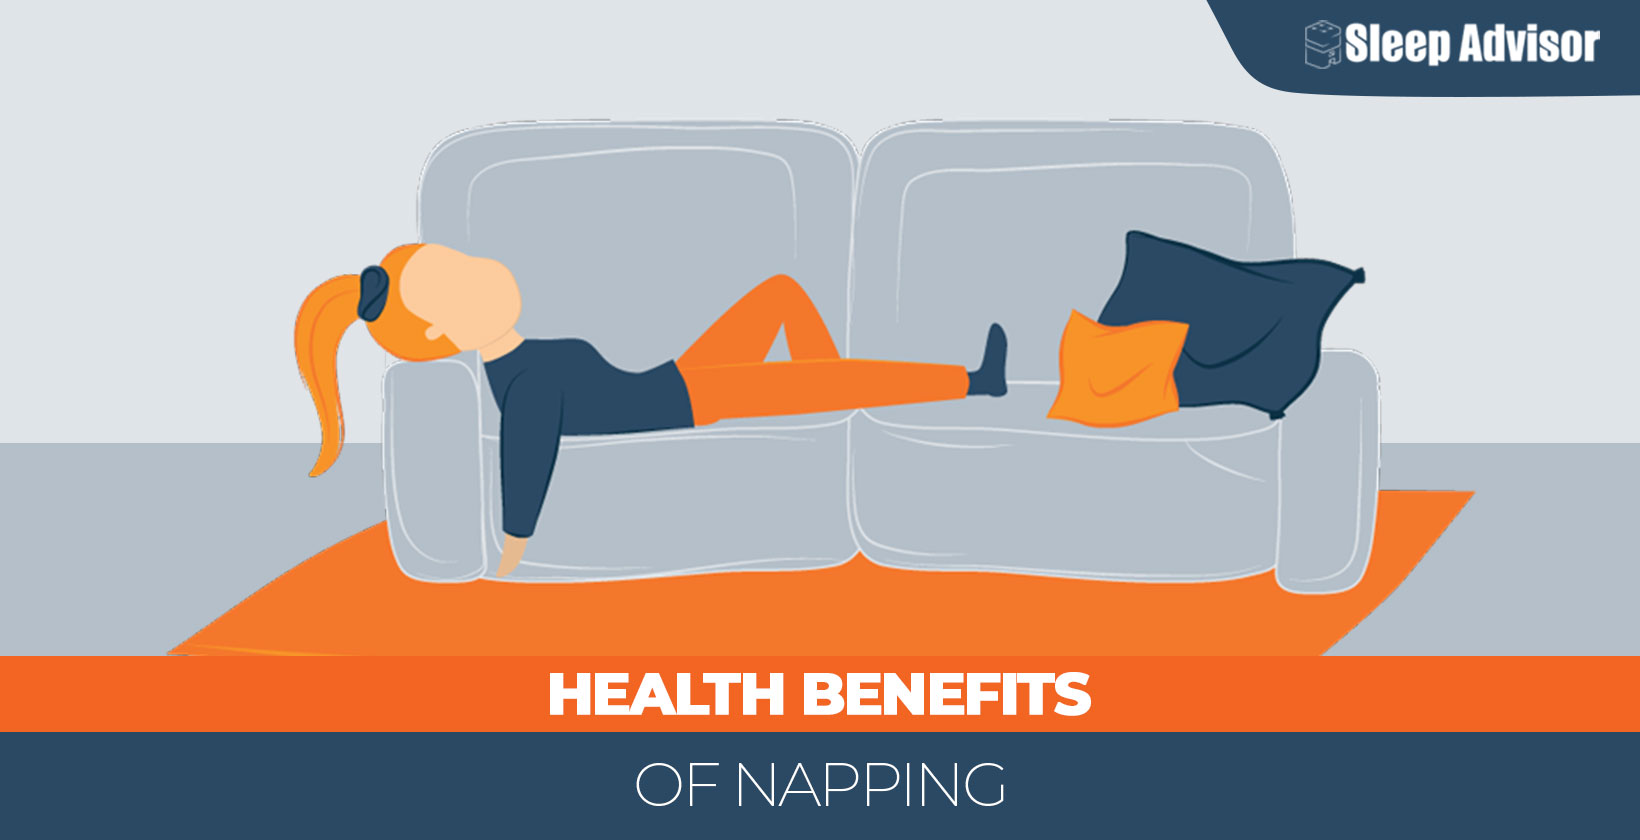 Are Naps Good for You? The Health Benefits of Napping